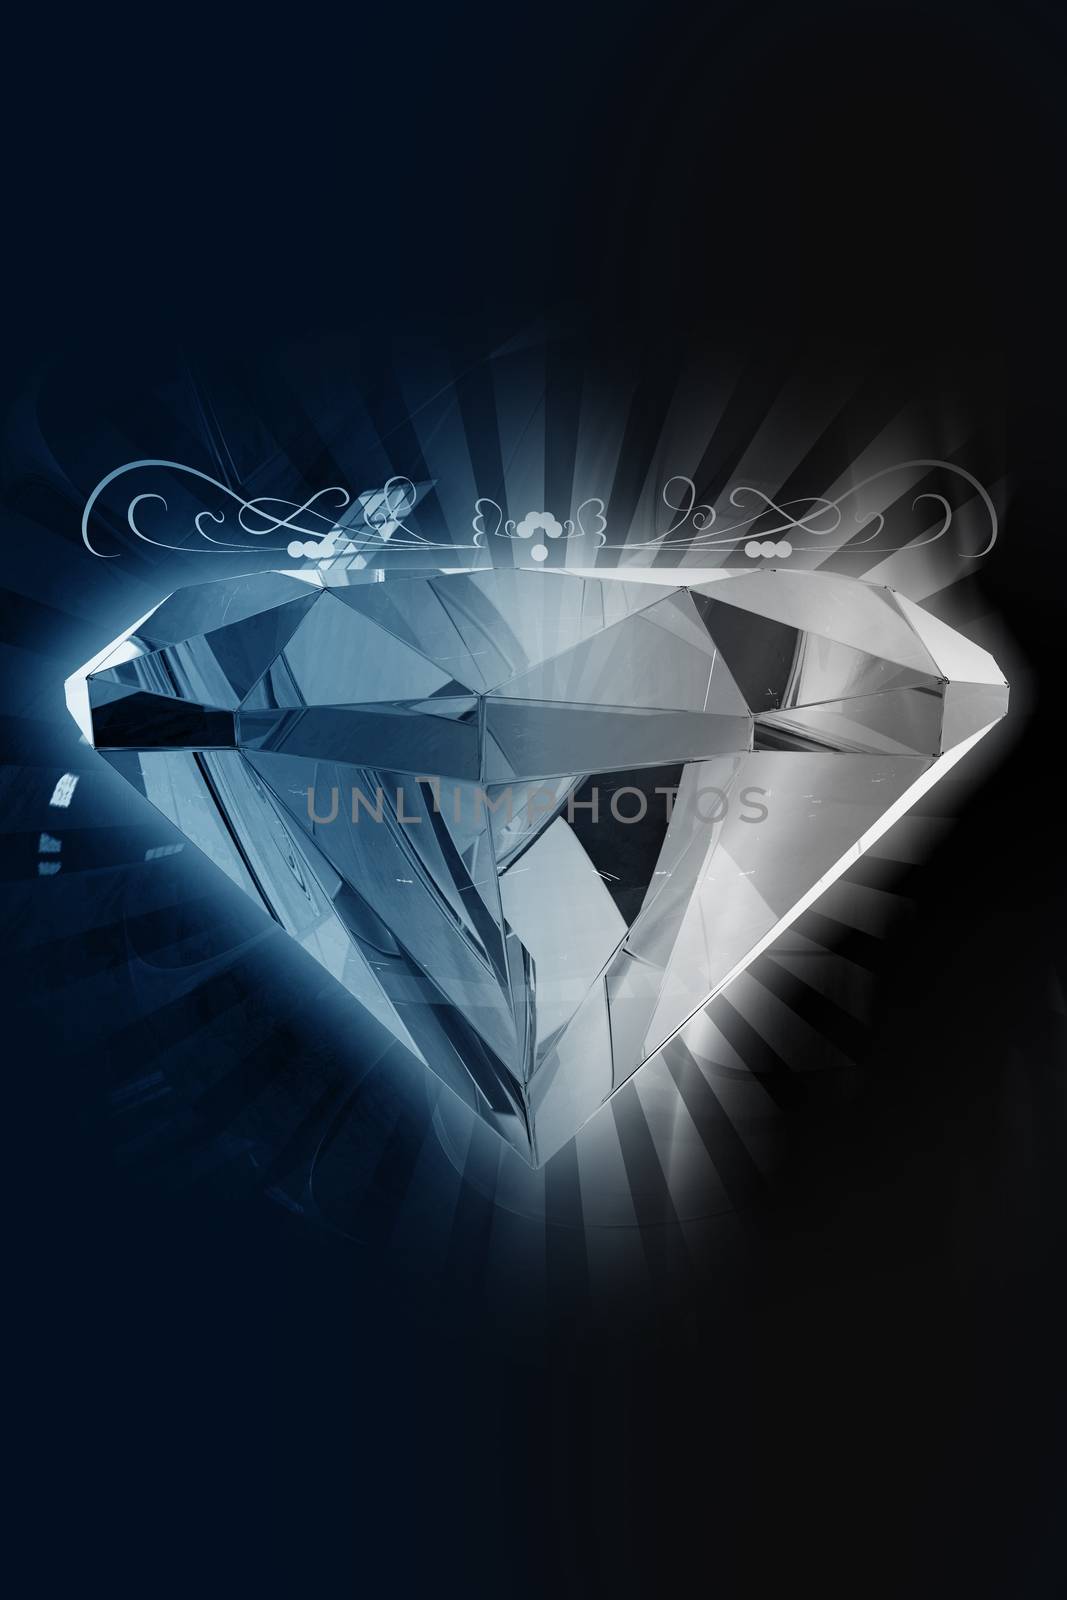 Black Diamond - Elegant Diamond Background. 3D Rendered Diamond with Rays and Ornaments. Black-Dark Background. Vertical Design. Great as Jewelry Store Background etc.